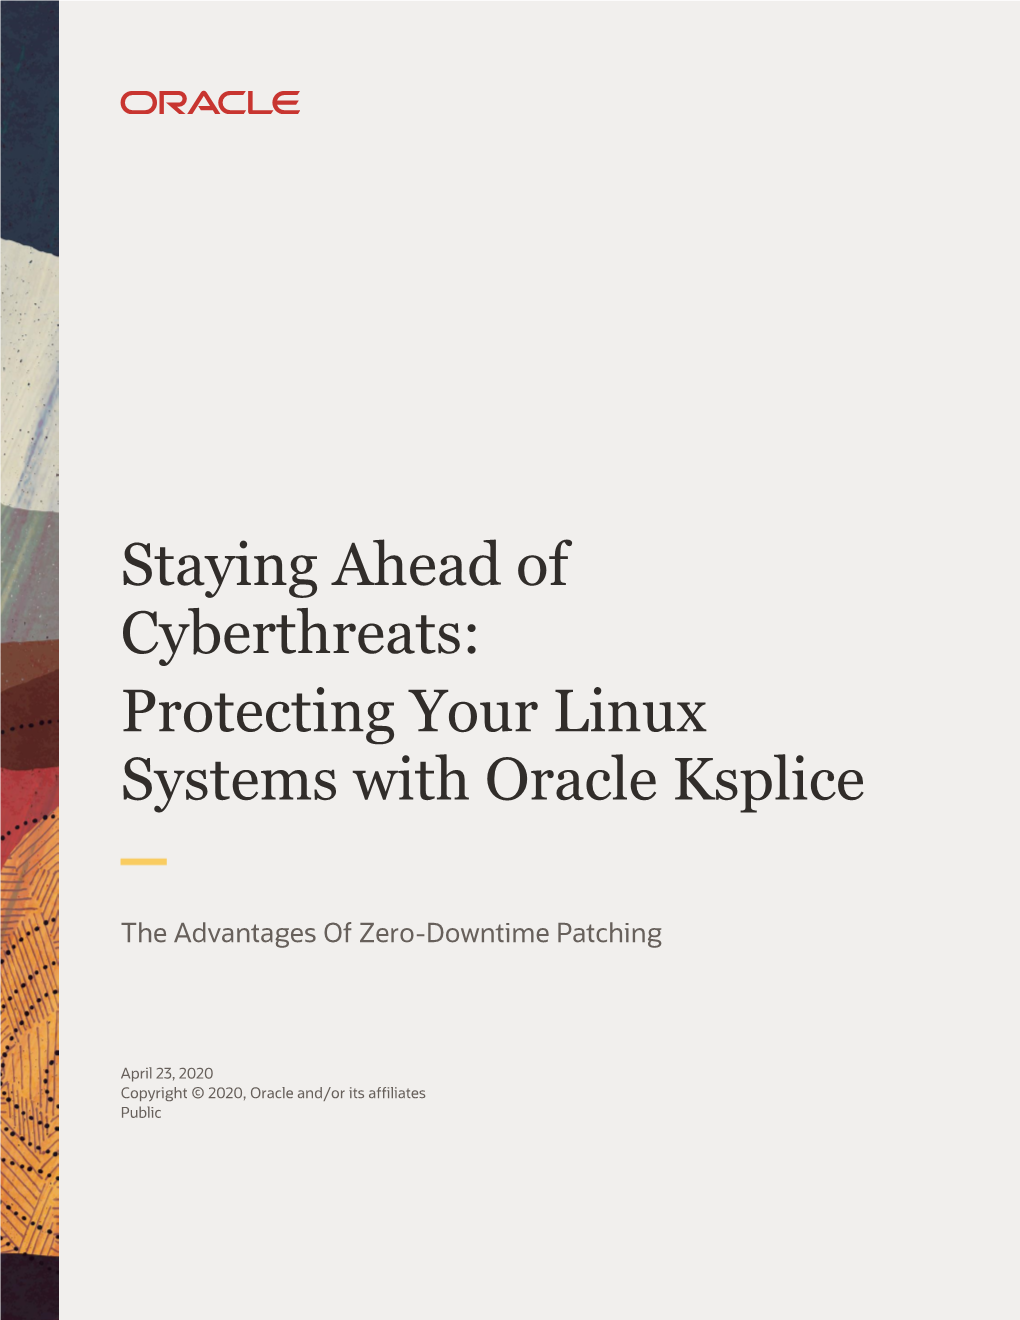 Protecting Your Linux Systems with Oracle Ksplice